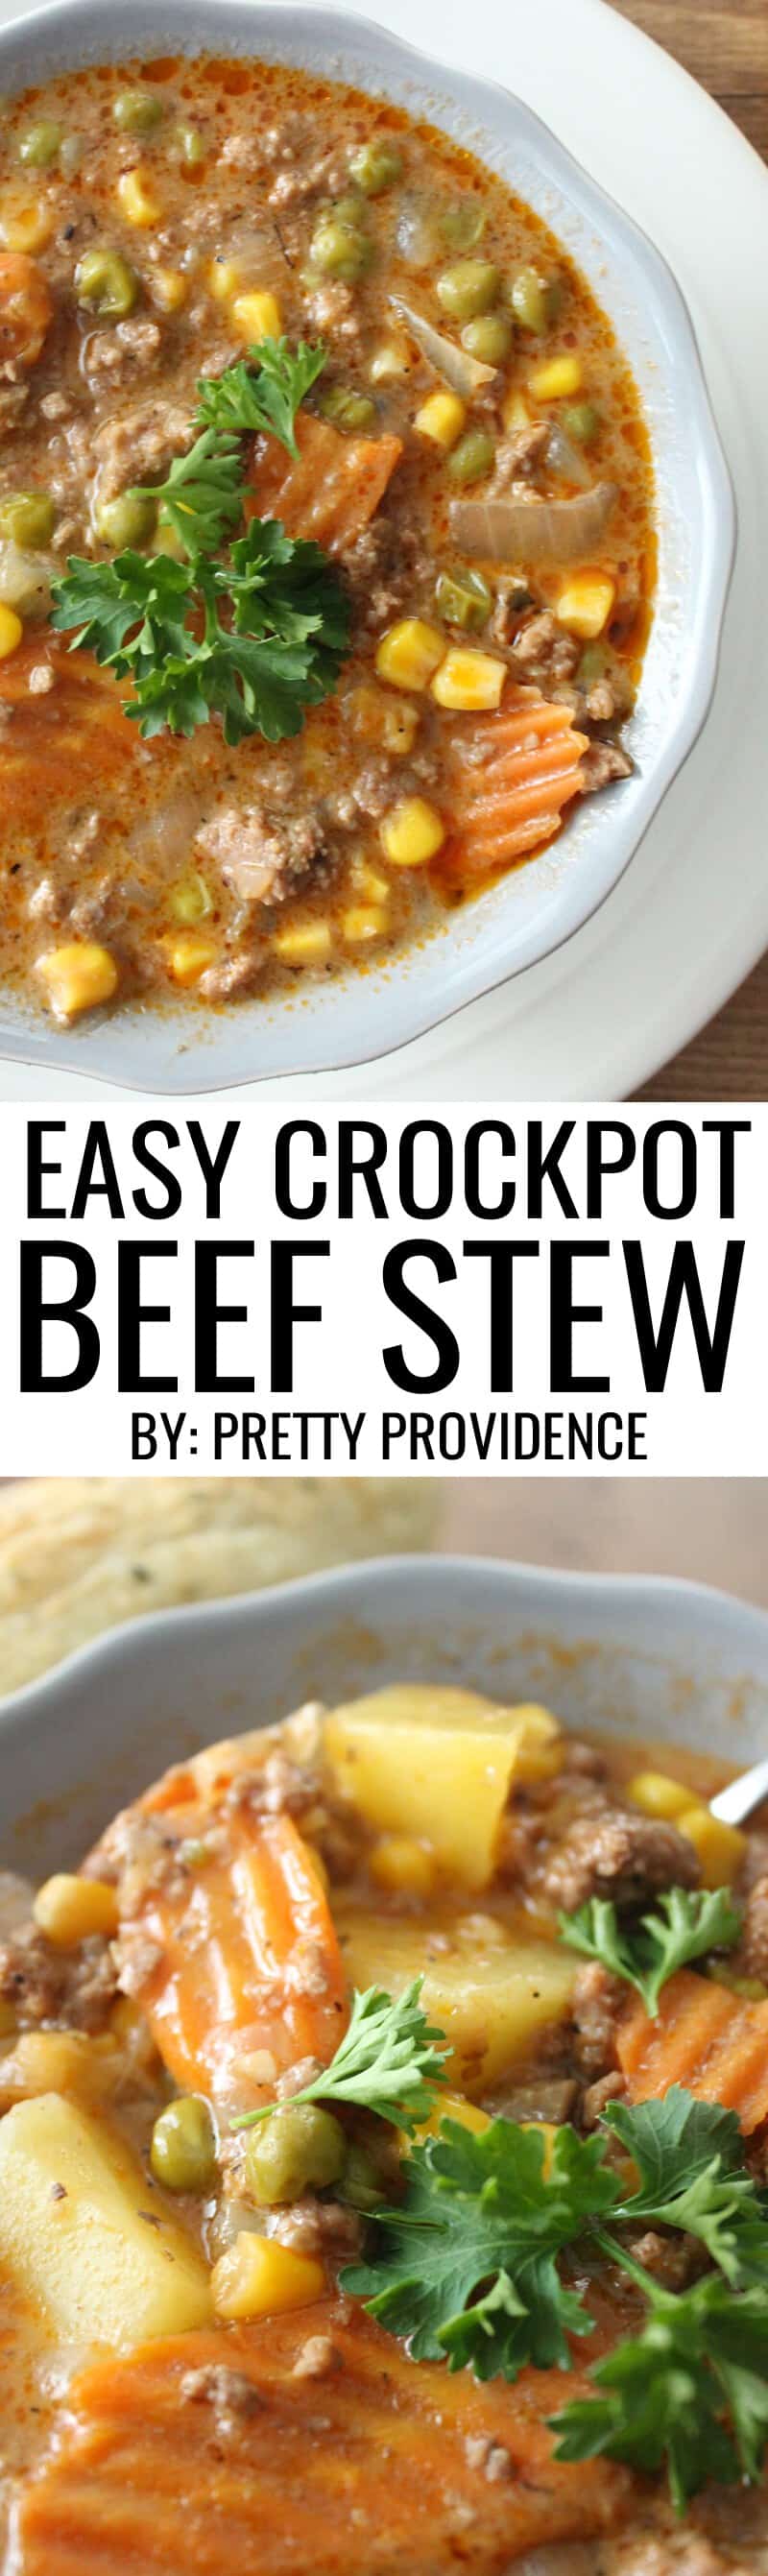 Okay this easy crockpot beef stew is seriously the best weeknight dinner! It's healthy, easy and delicious, what more could you need? 